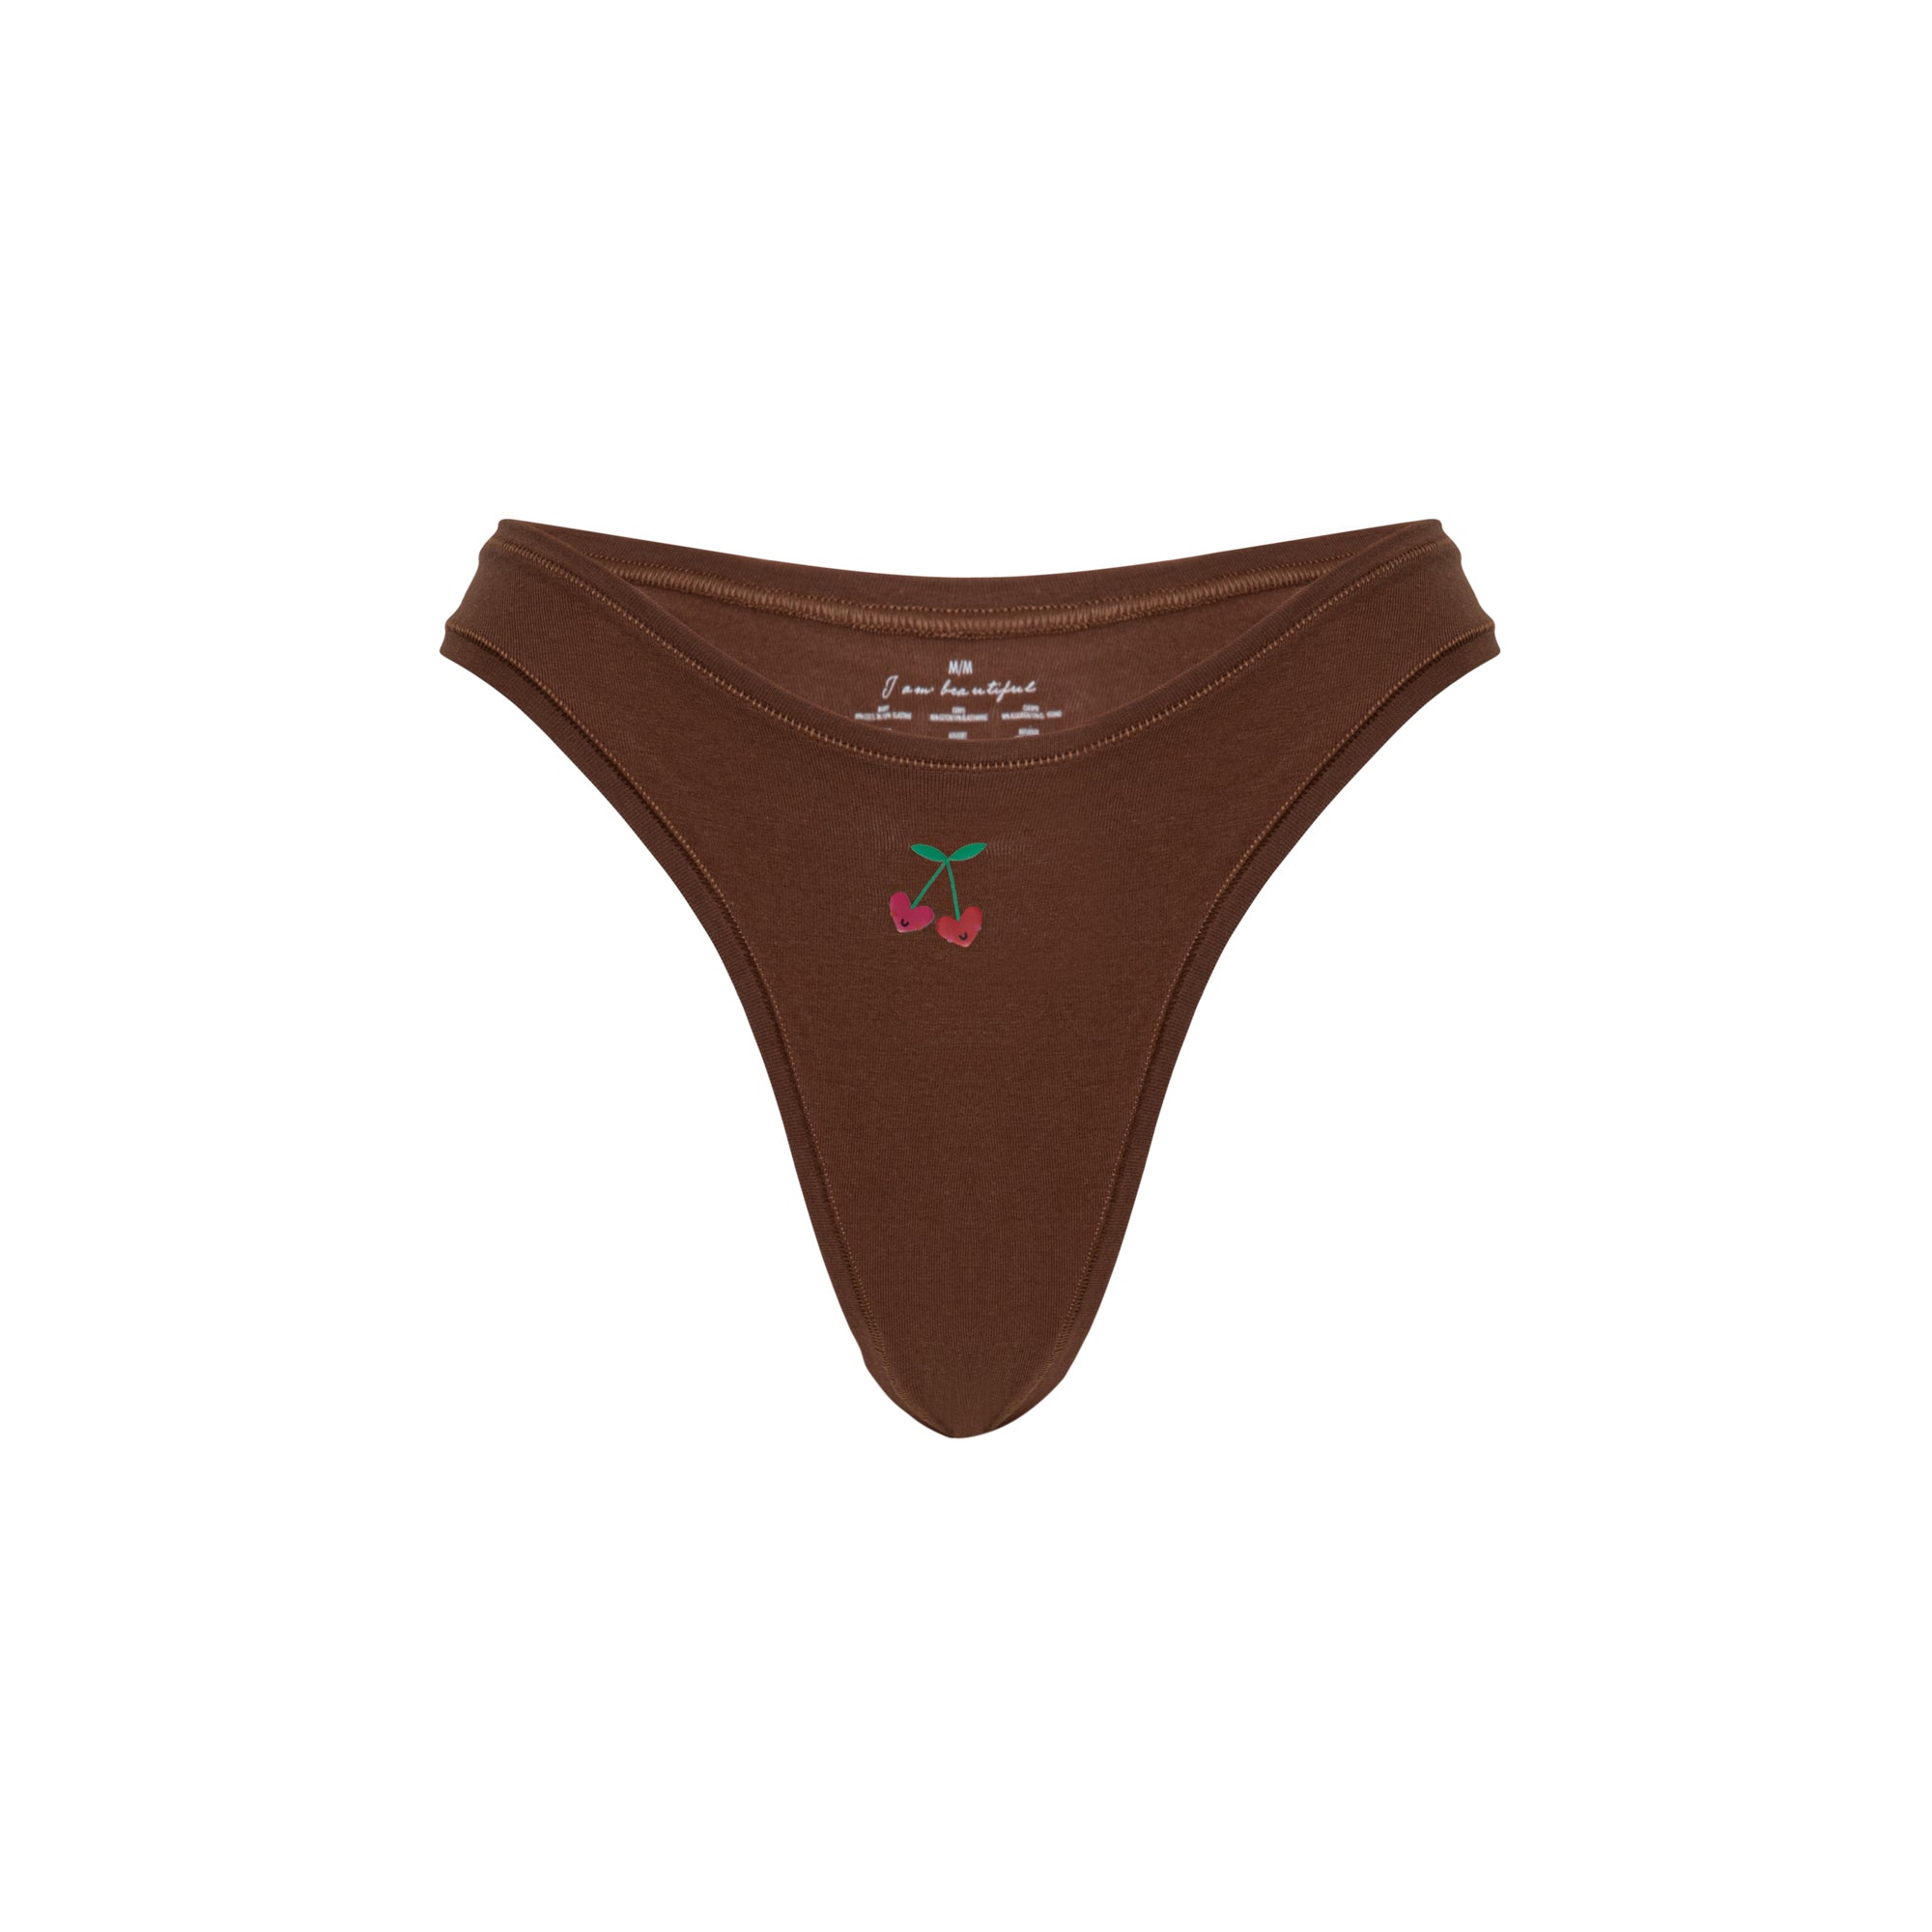 Cheeky Cherry Period Underwear Review - A little Rose Dust